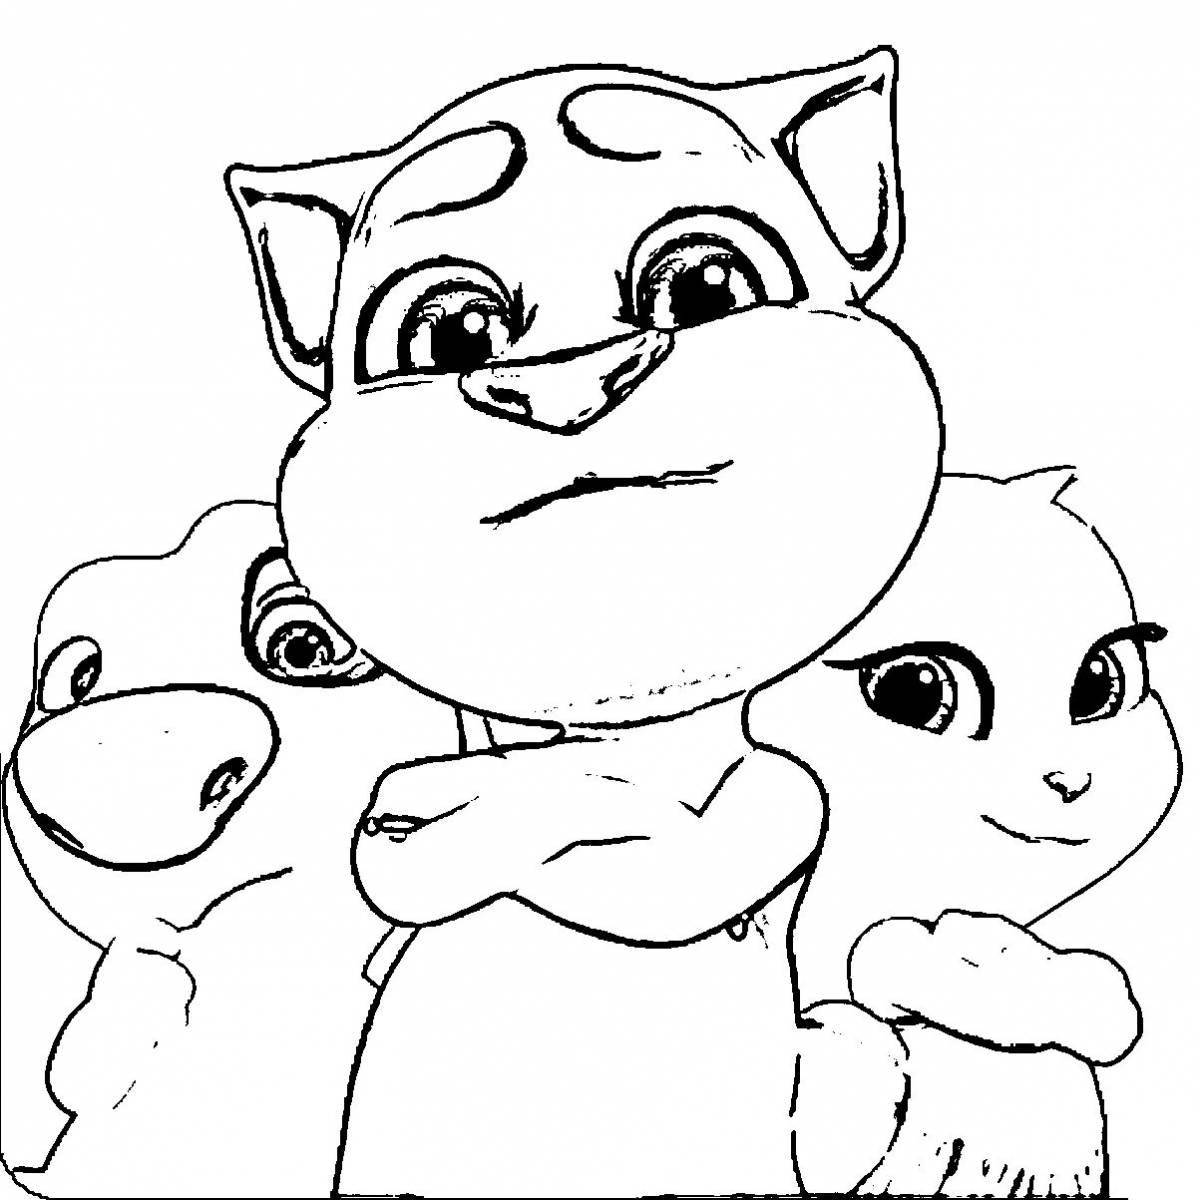 Coloring page charm my talking angela